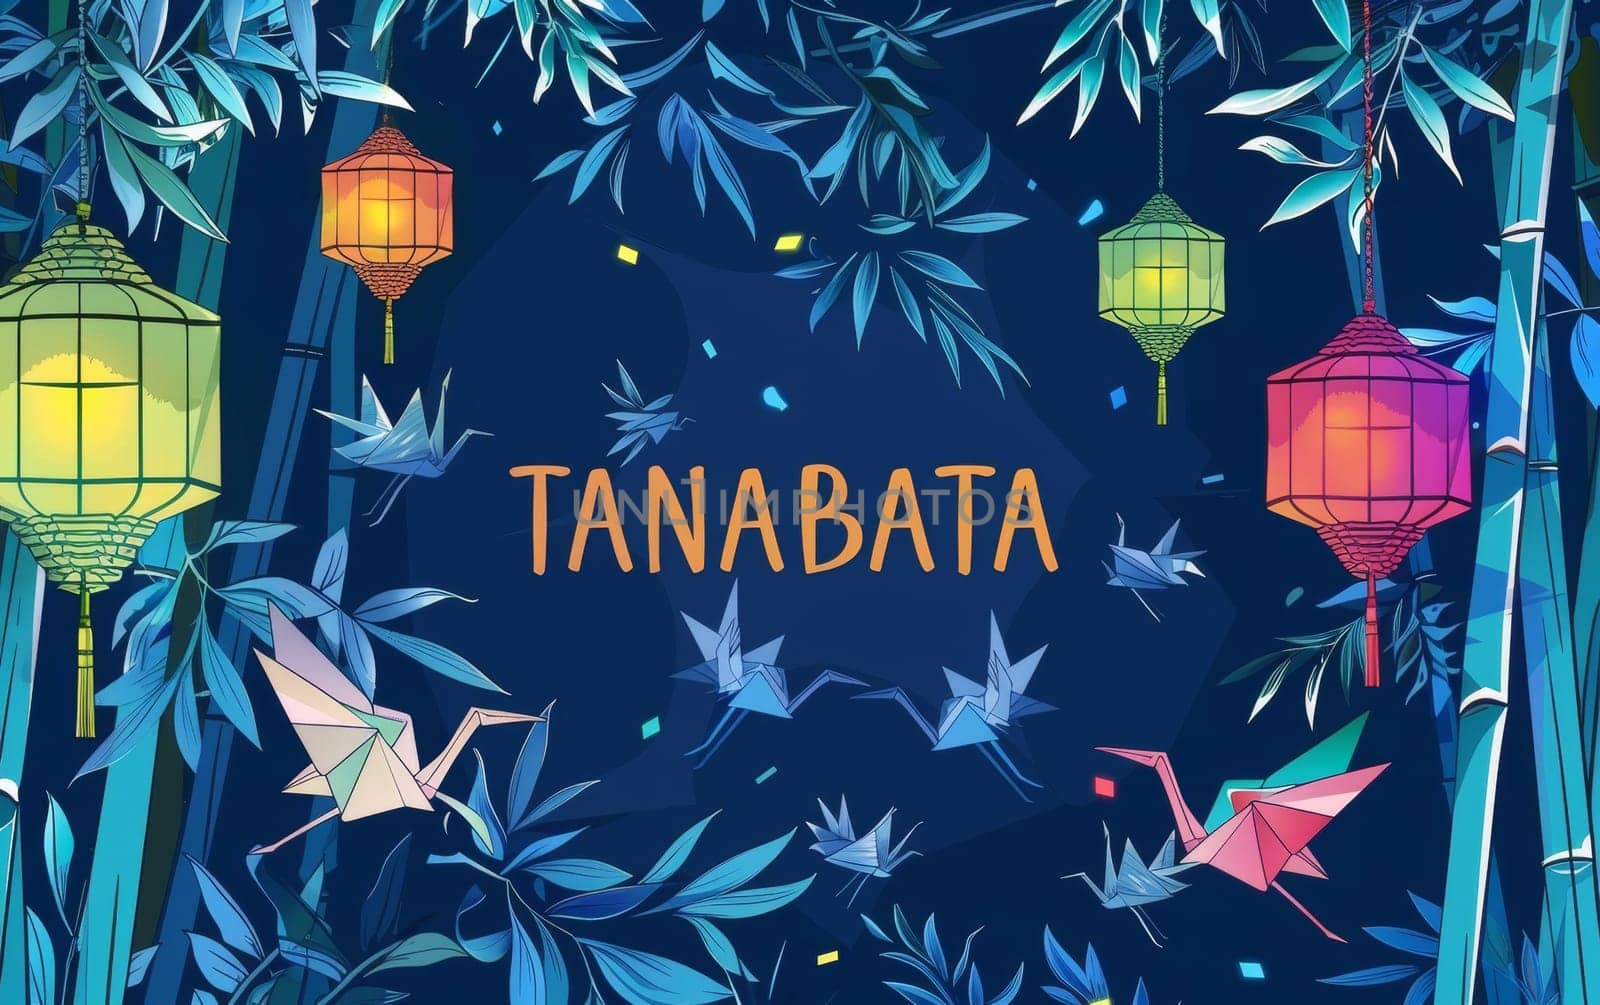 Festive paper lanterns and origami cranes set against a dark blue background celebrate Tanabata, Japans star festival, with a spirited and cultural charm